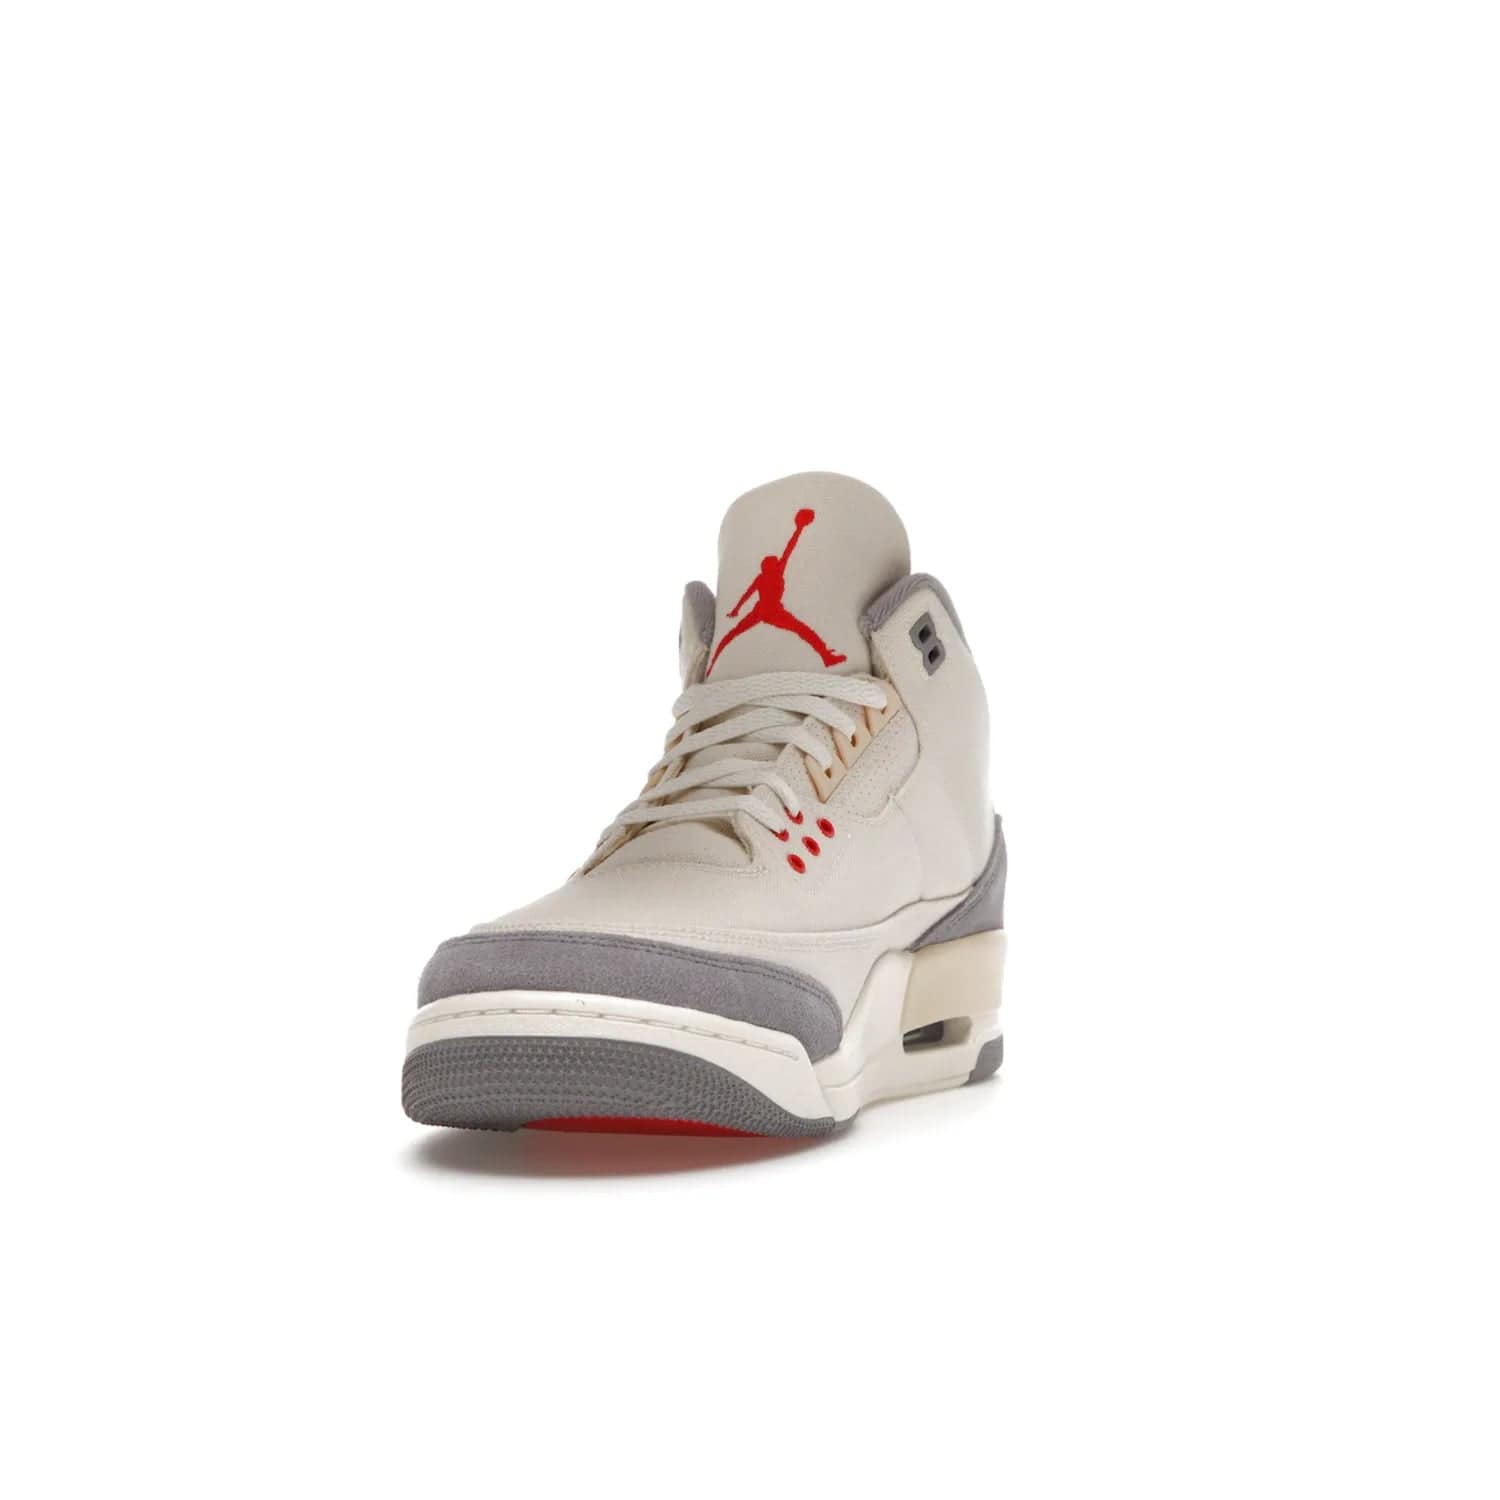 Jordan 3 Retro Muslin - Image 12 - Only at www.BallersClubKickz.com - Eye-catching Air Jordan 3 Retro Muslin in a neutral palette of grey, cream, and red. Featuring canvas upper, suede overlays and white/grey Air Max sole. Available in March 2022.